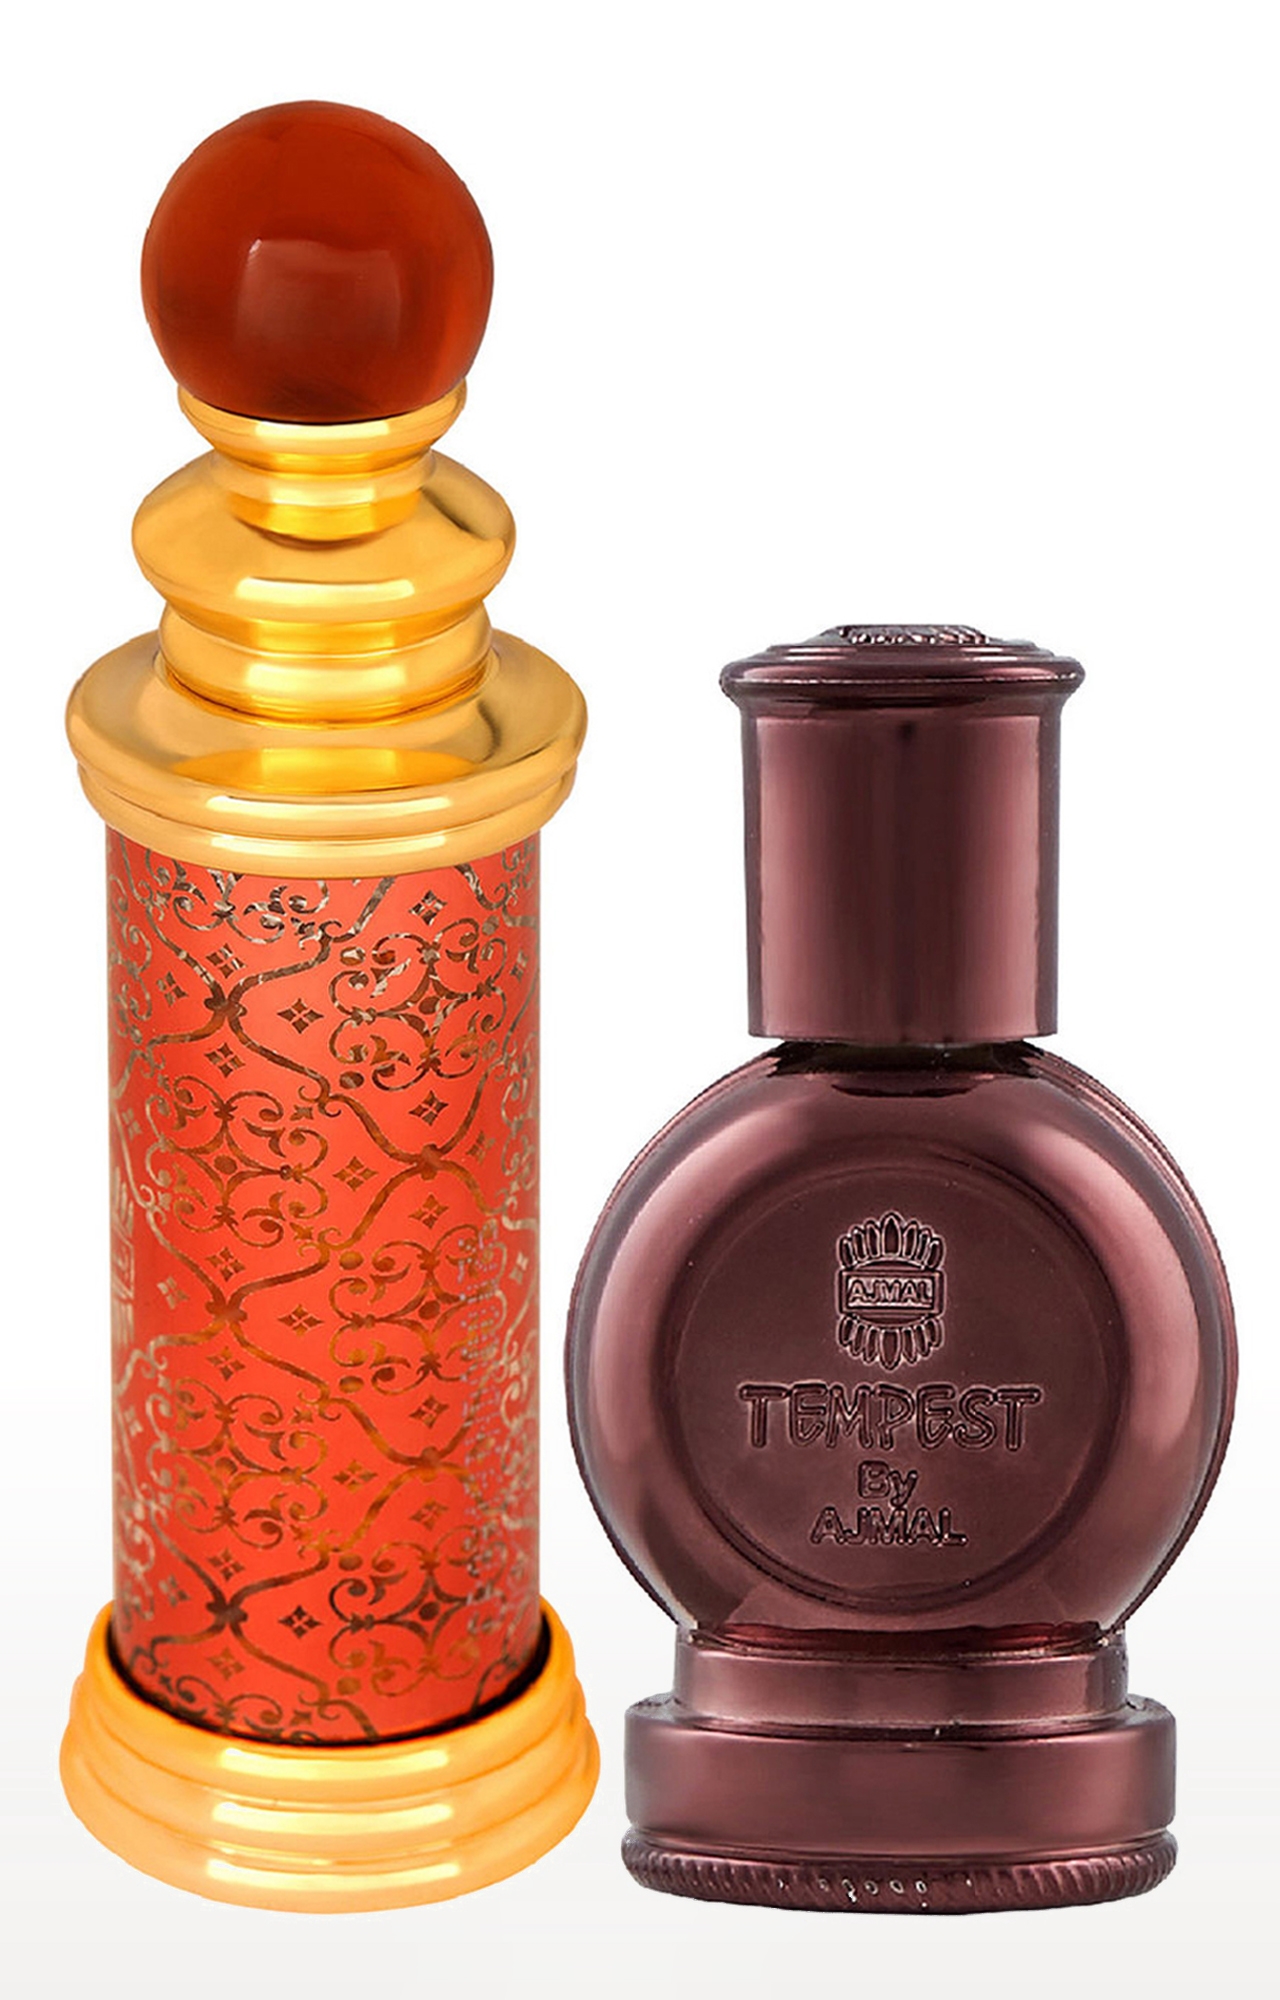 Ajmal | Ajmal Classic Oud Concentrated Perfume Oil Oudh Alcohol-free Attar 10ml for Unisex and Tempest Concentrated Perfume Oil Alcohol-free Attar 12ml for Unisex